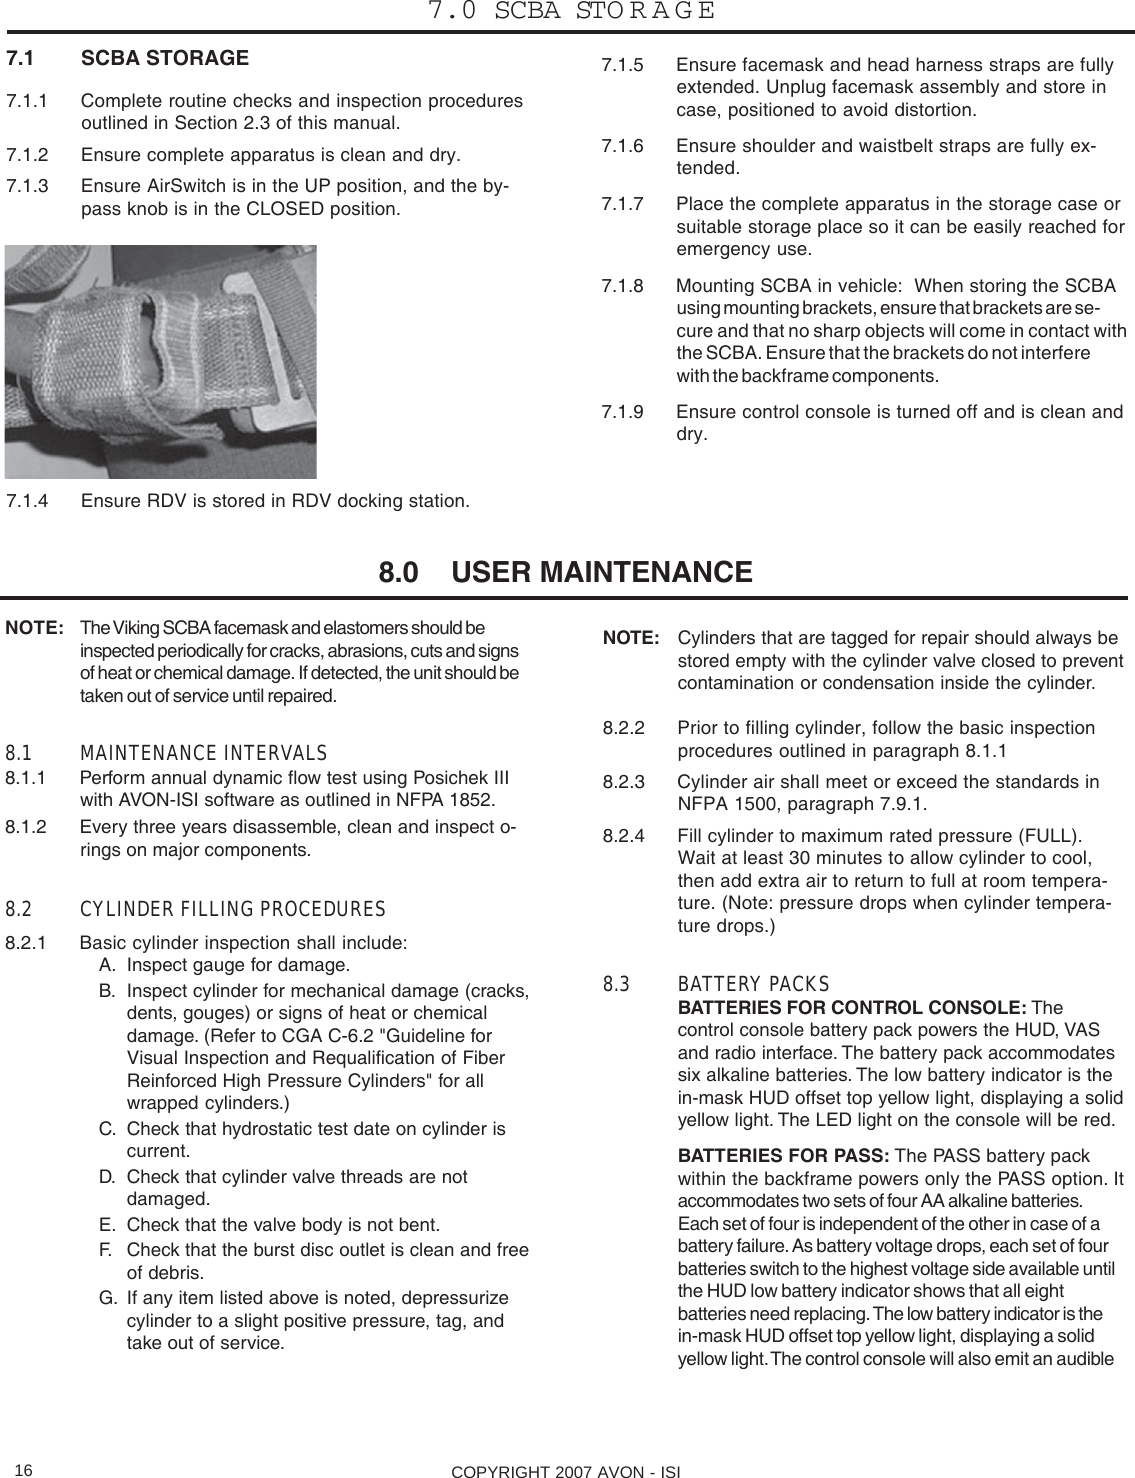 COPYRIGHT 2007 AVON - ISI16NOTE: Cylinders that are tagged for repair should always bestored empty with the cylinder valve closed to preventcontamination or condensation inside the cylinder.8.2.2 Prior to filling cylinder, follow the basic inspectionprocedures outlined in paragraph 8.1.18.2.3 Cylinder air shall meet or exceed the standards inNFPA 1500, paragraph 7.9.1.8.2.4 Fill cylinder to maximum rated pressure (FULL).Wait at least 30 minutes to allow cylinder to cool,then add extra air to return to full at room tempera-ture. (Note: pressure drops when cylinder tempera-ture drops.)8.3 BATTERY PACKSBATTERIES FOR CONTROL CONSOLE: Thecontrol console battery pack powers the HUD, VASand radio interface. The battery pack accommodatessix alkaline batteries. The low battery indicator is thein-mask HUD offset top yellow light, displaying a solidyellow light. The LED light on the console will be red.BATTERIES FOR PASS: The PASS battery packwithin the backframe powers only the PASS option. Itaccommodates two sets of four AA alkaline batteries.Each set of four is independent of the other in case of abattery failure. As battery voltage drops, each set of fourbatteries switch to the highest voltage side available untilthe HUD low battery indicator shows that all eightbatteries need replacing. The low battery indicator is thein-mask HUD offset top yellow light, displaying a solidyellow light. The control console will also emit an audibleNOTE: The Viking SCBA facemask and elastomers should beinspected periodically for cracks, abrasions, cuts and signsof heat or chemical damage. If detected, the unit should betaken out of service until repaired.8.1 MAINTENANCE INTERVALS8.1.1 Perform annual dynamic flow test using Posichek IIIwith AVON-ISI software as outlined in NFPA 1852.8.1.2 Every three years disassemble, clean and inspect o-rings on major components.8.2 CYLINDER FILLING PROCEDURES8.2.1 Basic cylinder inspection shall include:A. Inspect gauge for damage.B. Inspect cylinder for mechanical damage (cracks,dents, gouges) or signs of heat or chemicaldamage. (Refer to CGA C-6.2 &quot;Guideline forVisual Inspection and Requalification of FiberReinforced High Pressure Cylinders&quot; for allwrapped cylinders.)C. Check that hydrostatic test date on cylinder iscurrent.D. Check that cylinder valve threads are notdamaged.E. Check that the valve body is not bent.F. Check that the burst disc outlet is clean and freeof debris.G. If any item listed above is noted, depressurizecylinder to a slight positive pressure, tag, andtake out of service.7.1 SCBA STORAGE7.1.1 Complete routine checks and inspection proceduresoutlined in Section 2.3 of this manual.7.1.2 Ensure complete apparatus is clean and dry.7.1.3 Ensure AirSwitch is in the UP position, and the by-pass knob is in the CLOSED position.7.1.4 Ensure RDV is stored in RDV docking station.7.1.5 Ensure facemask and head harness straps are fullyextended. Unplug facemask assembly and store incase, positioned to avoid distortion.7.1.6 Ensure shoulder and waistbelt straps are fully ex-tended.7.1.7 Place the complete apparatus in the storage case orsuitable storage place so it can be easily reached foremergency use.7.1.8 Mounting SCBA in vehicle:  When storing the SCBAusing mounting brackets, ensure that brackets are se-cure and that no sharp objects will come in contact withthe SCBA. Ensure that the brackets do not interferewith the backframe components.7.1.9 Ensure control console is turned off and is clean anddry.7.0 SCBA STORAGE8.0    USER MAINTENANCE